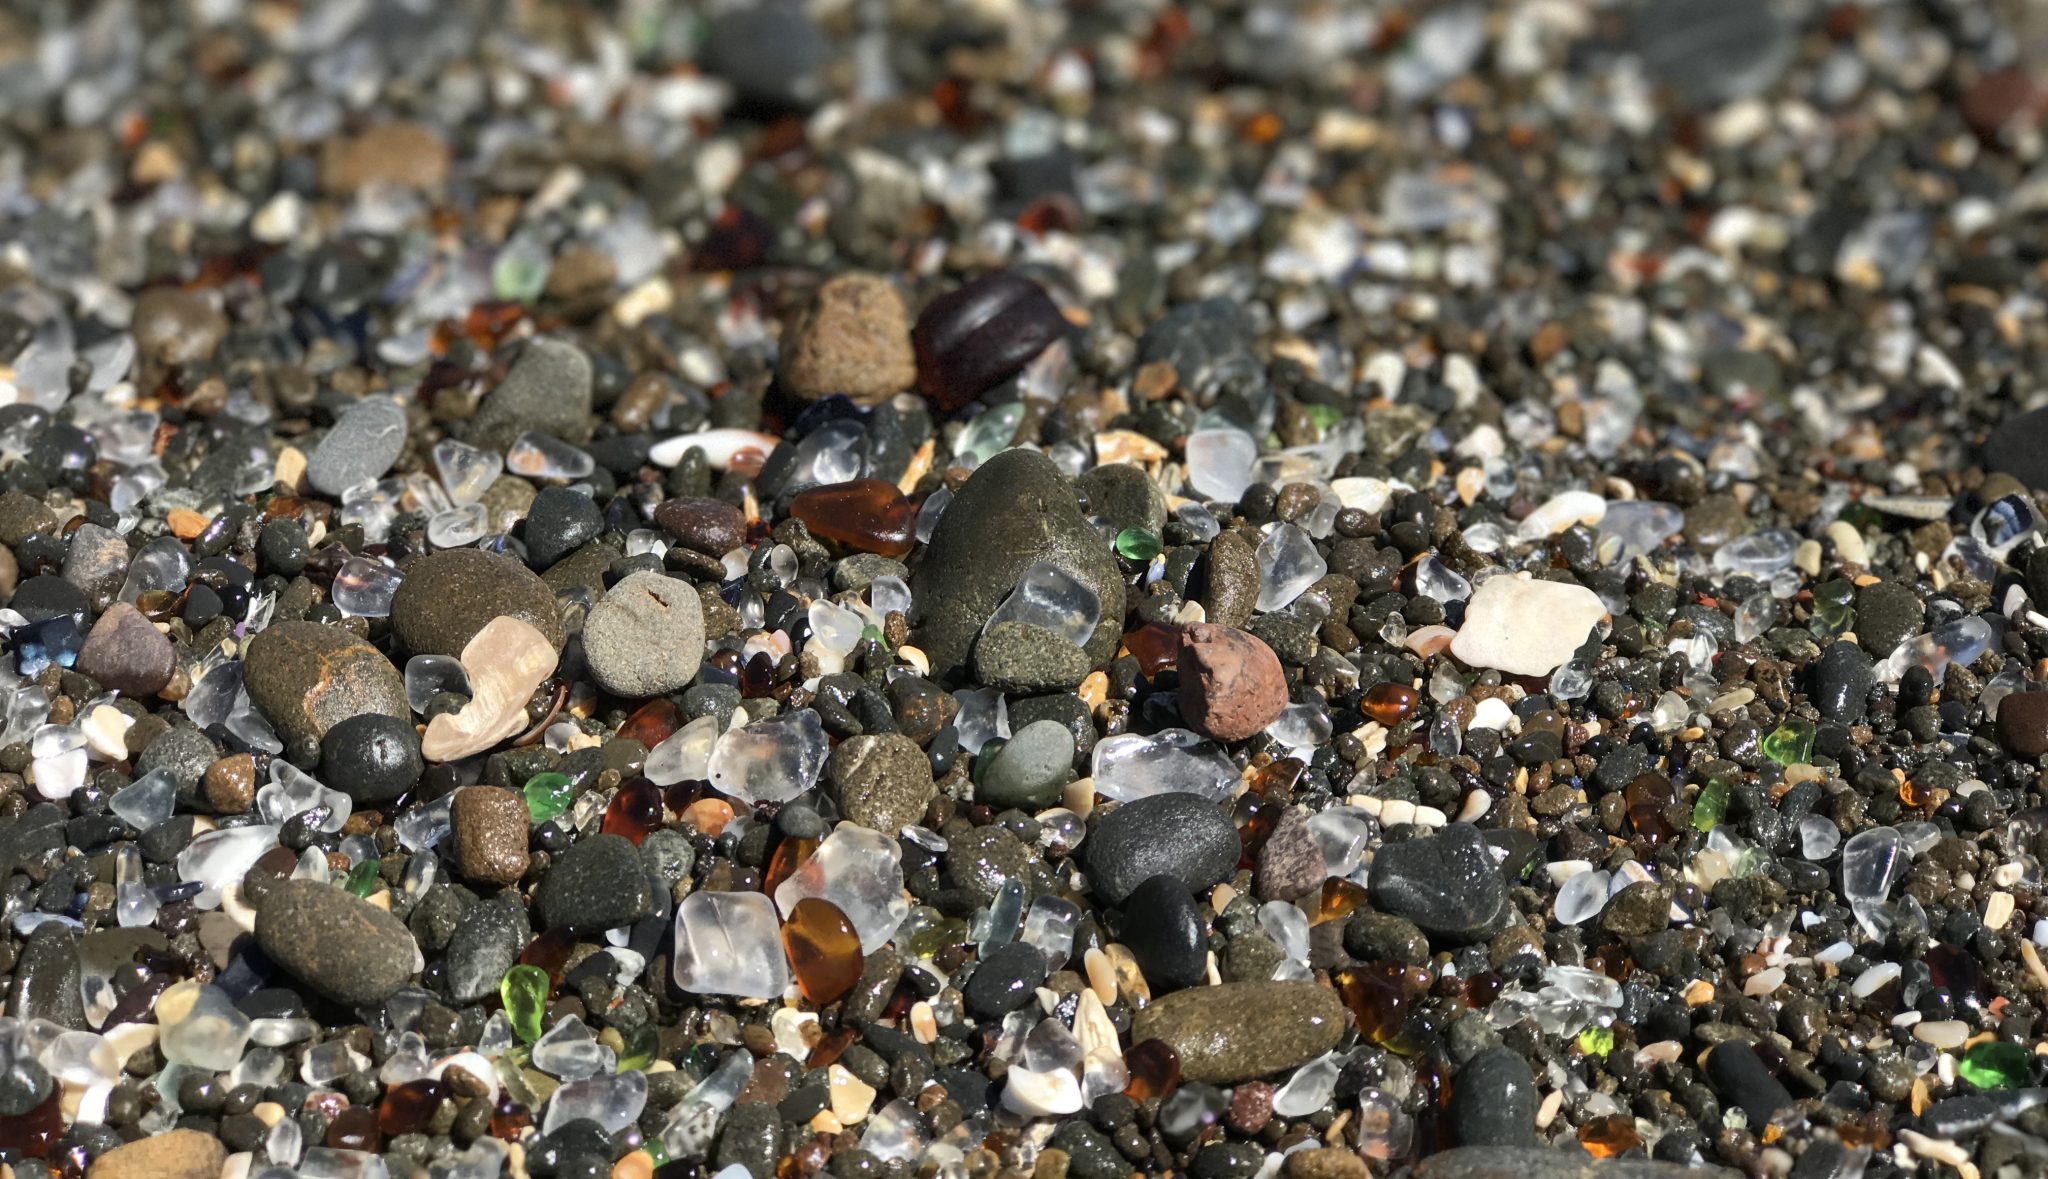 Polished glass and pebbles at Glass Beach in Fort Bragg